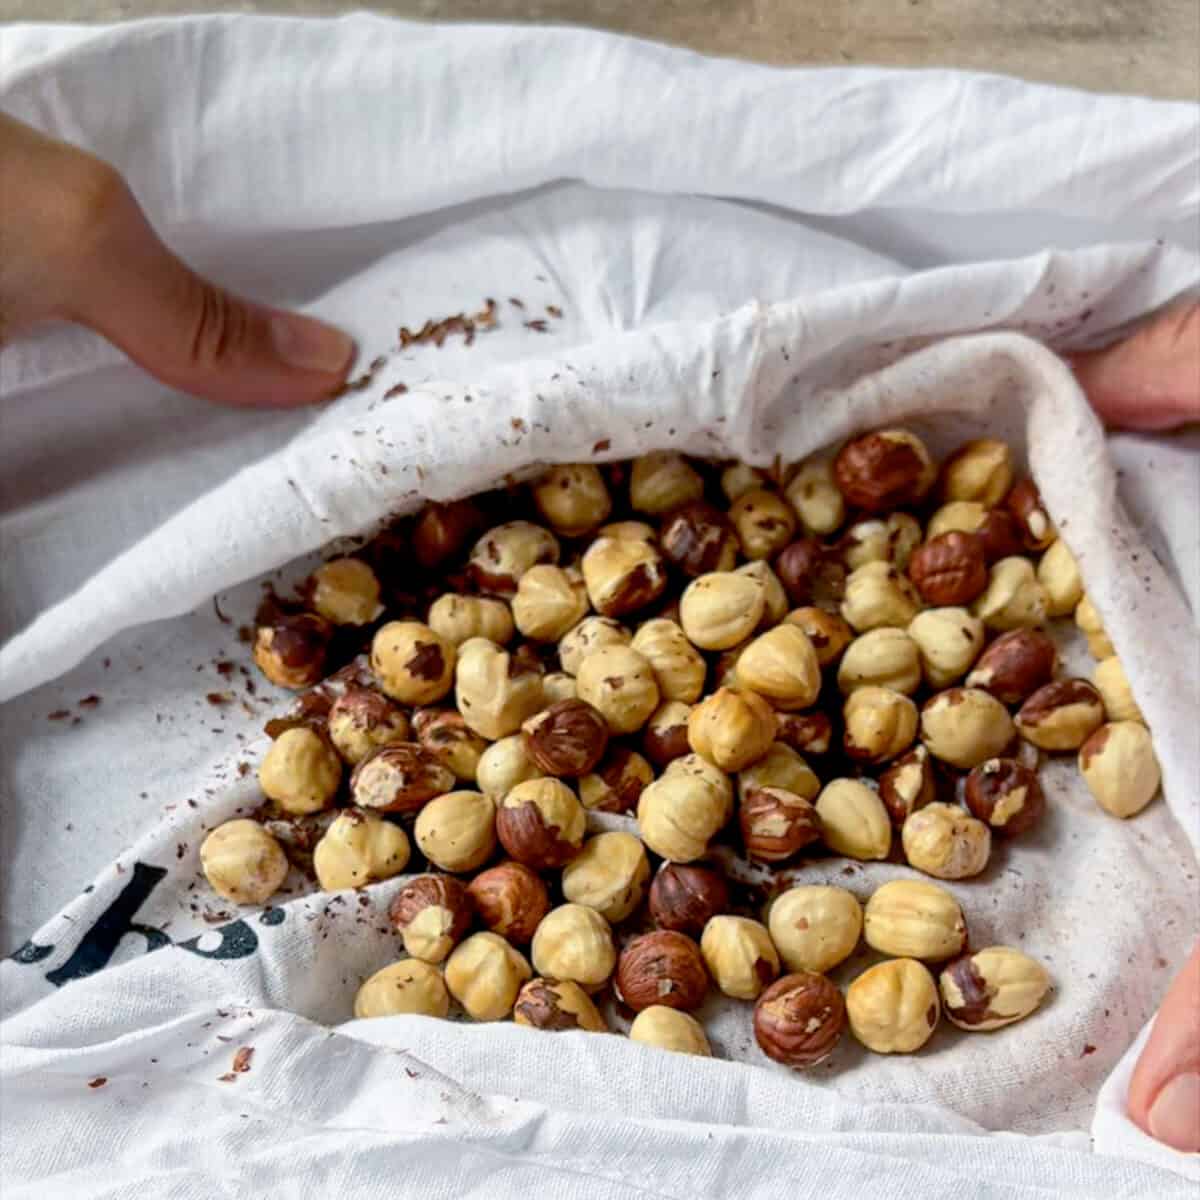 how to remove skins from hazelnuts